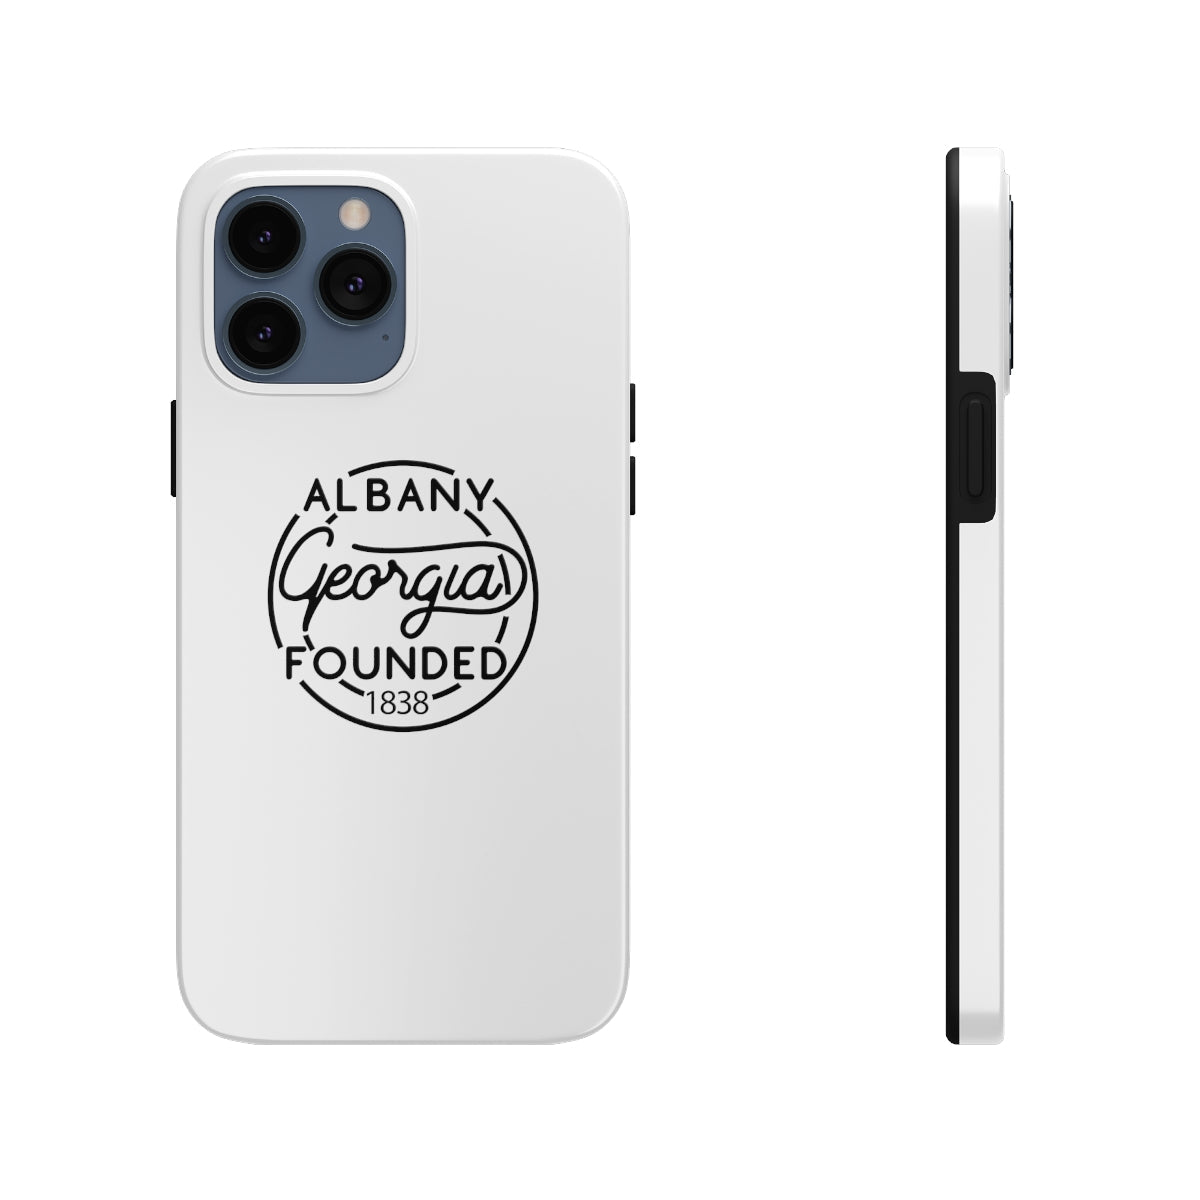 White iphone 13 pro max case for Albany, Georgia